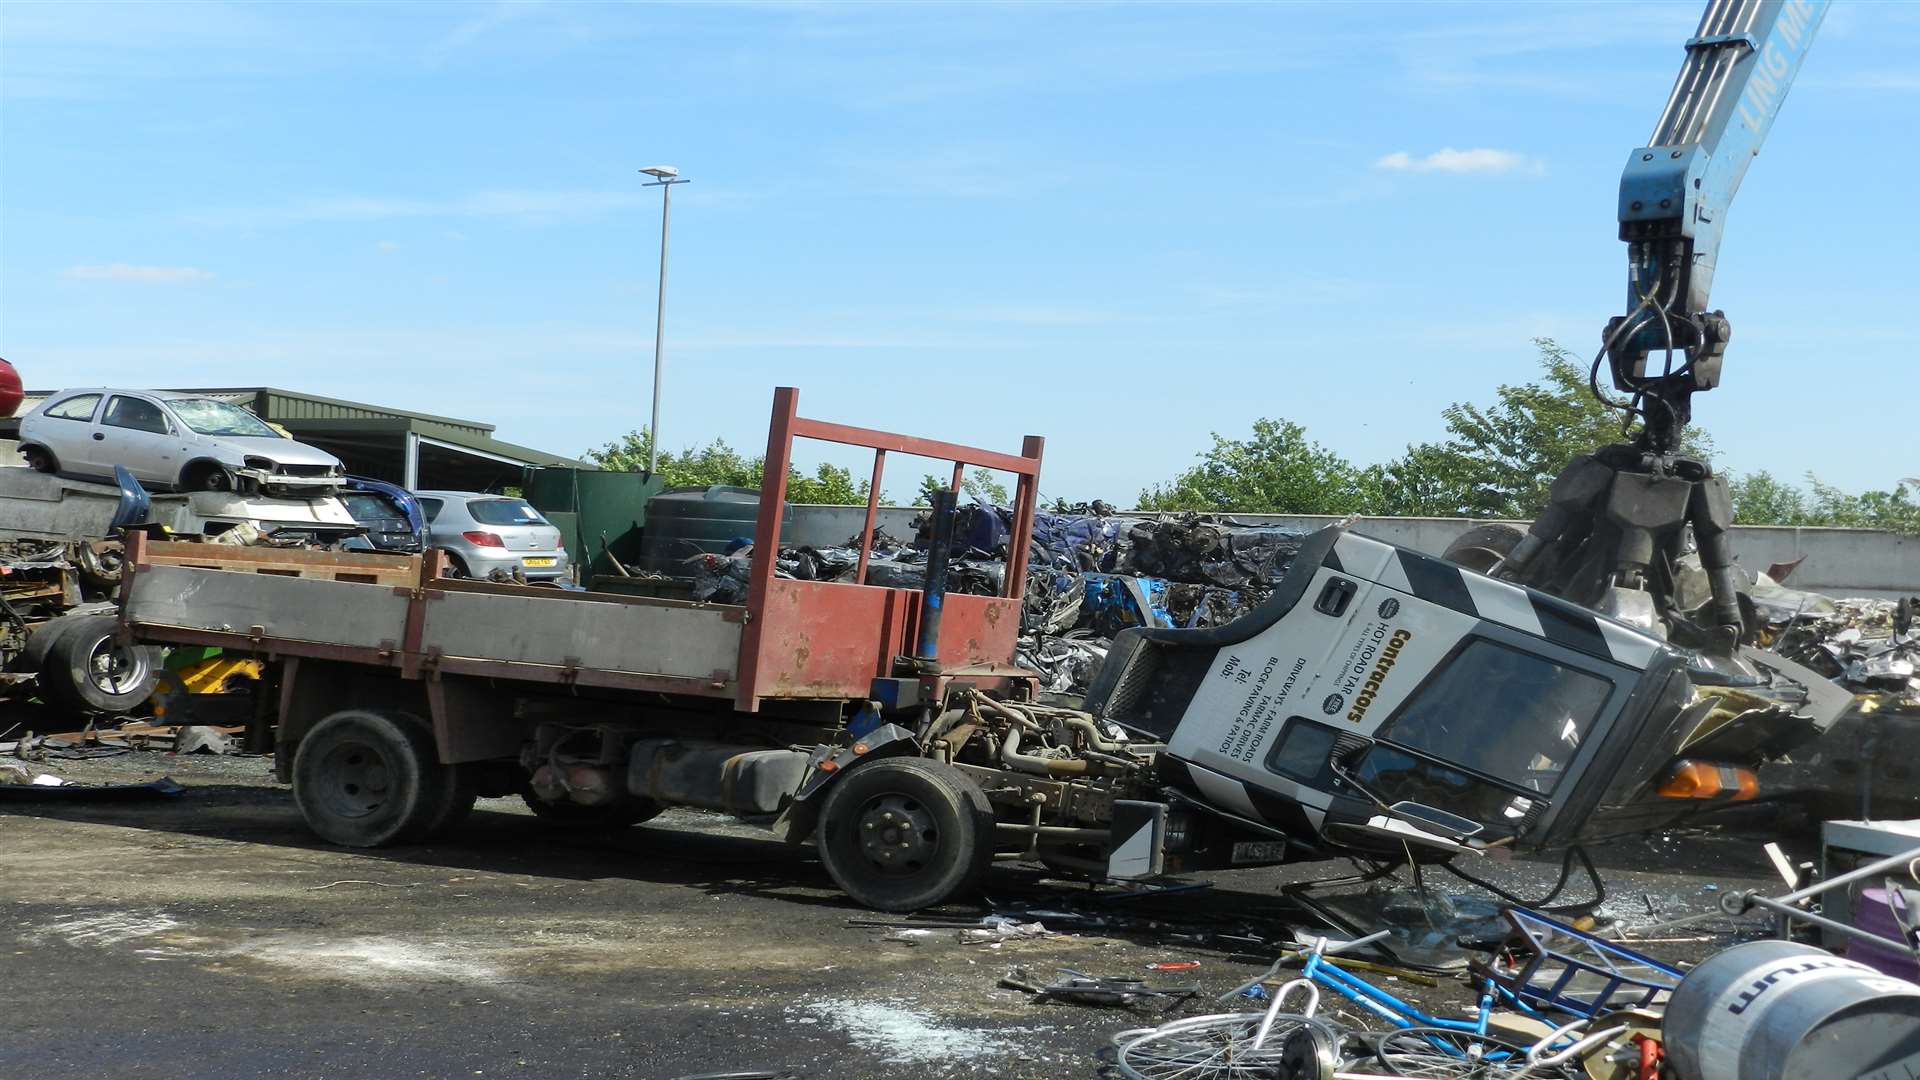 The lorry, which had been used to illegally dump rubbish, was destroyed by the council